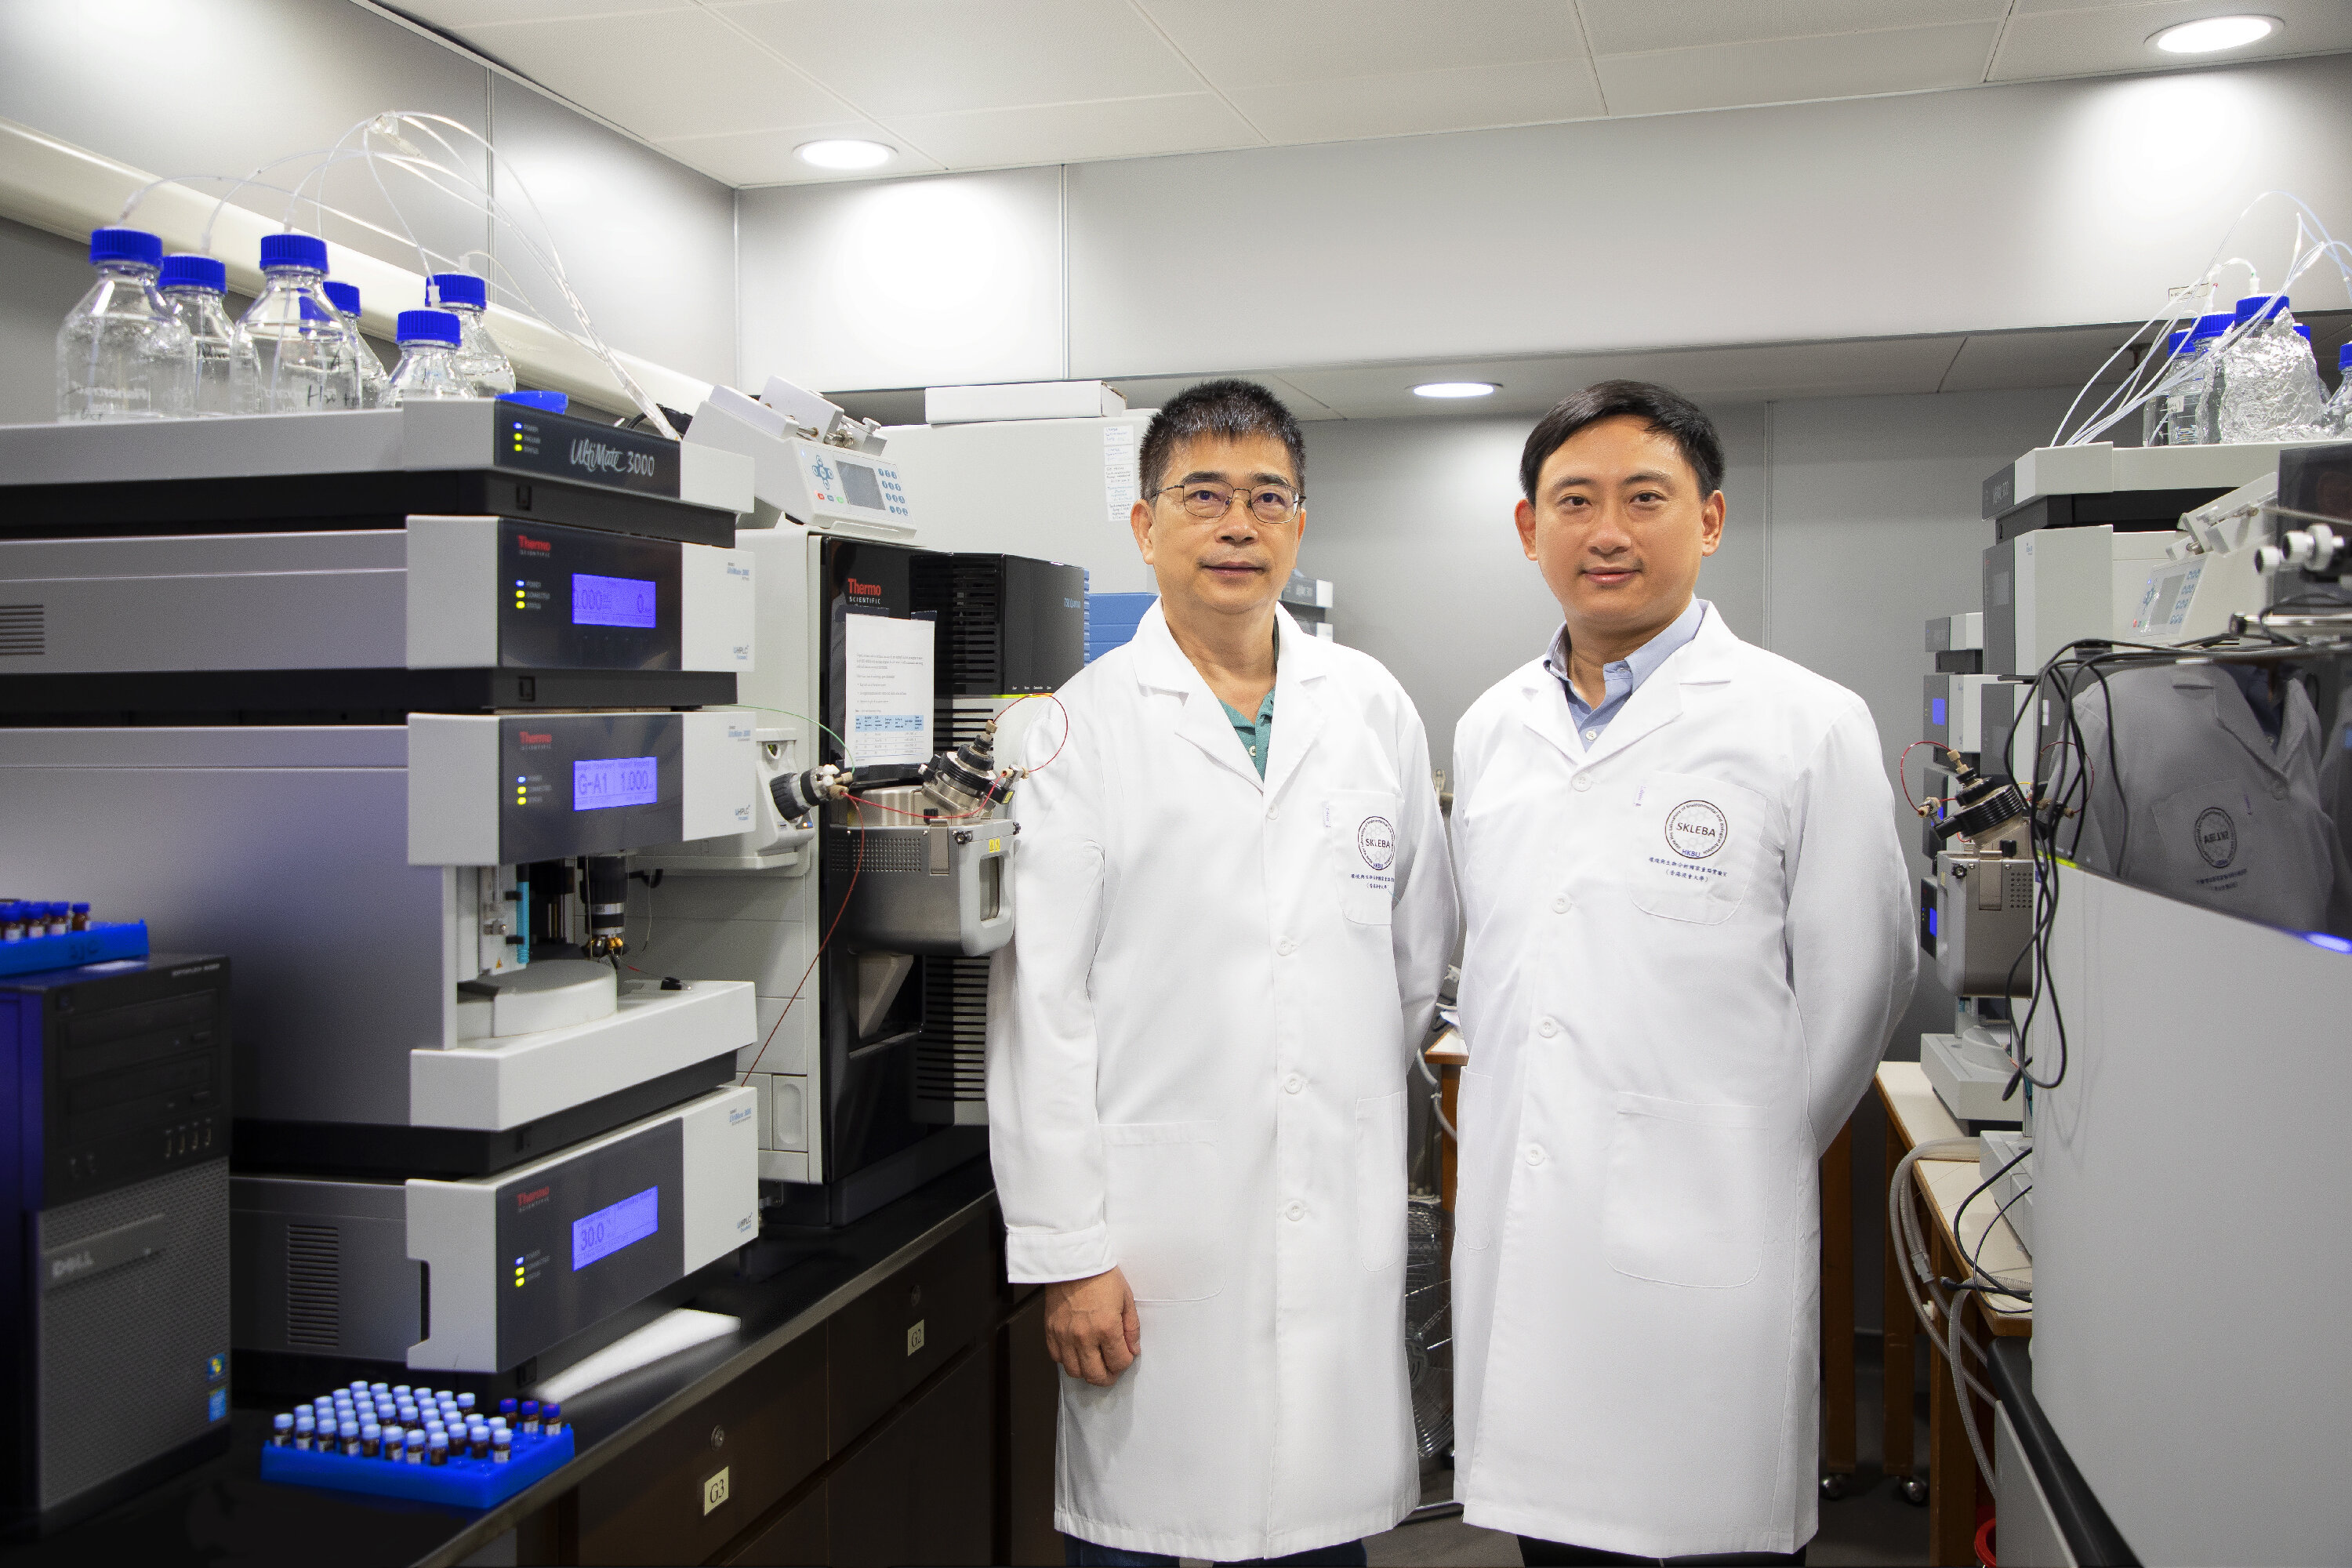 HKBU research offers new insights into maintaining COVID-19 antibody levels